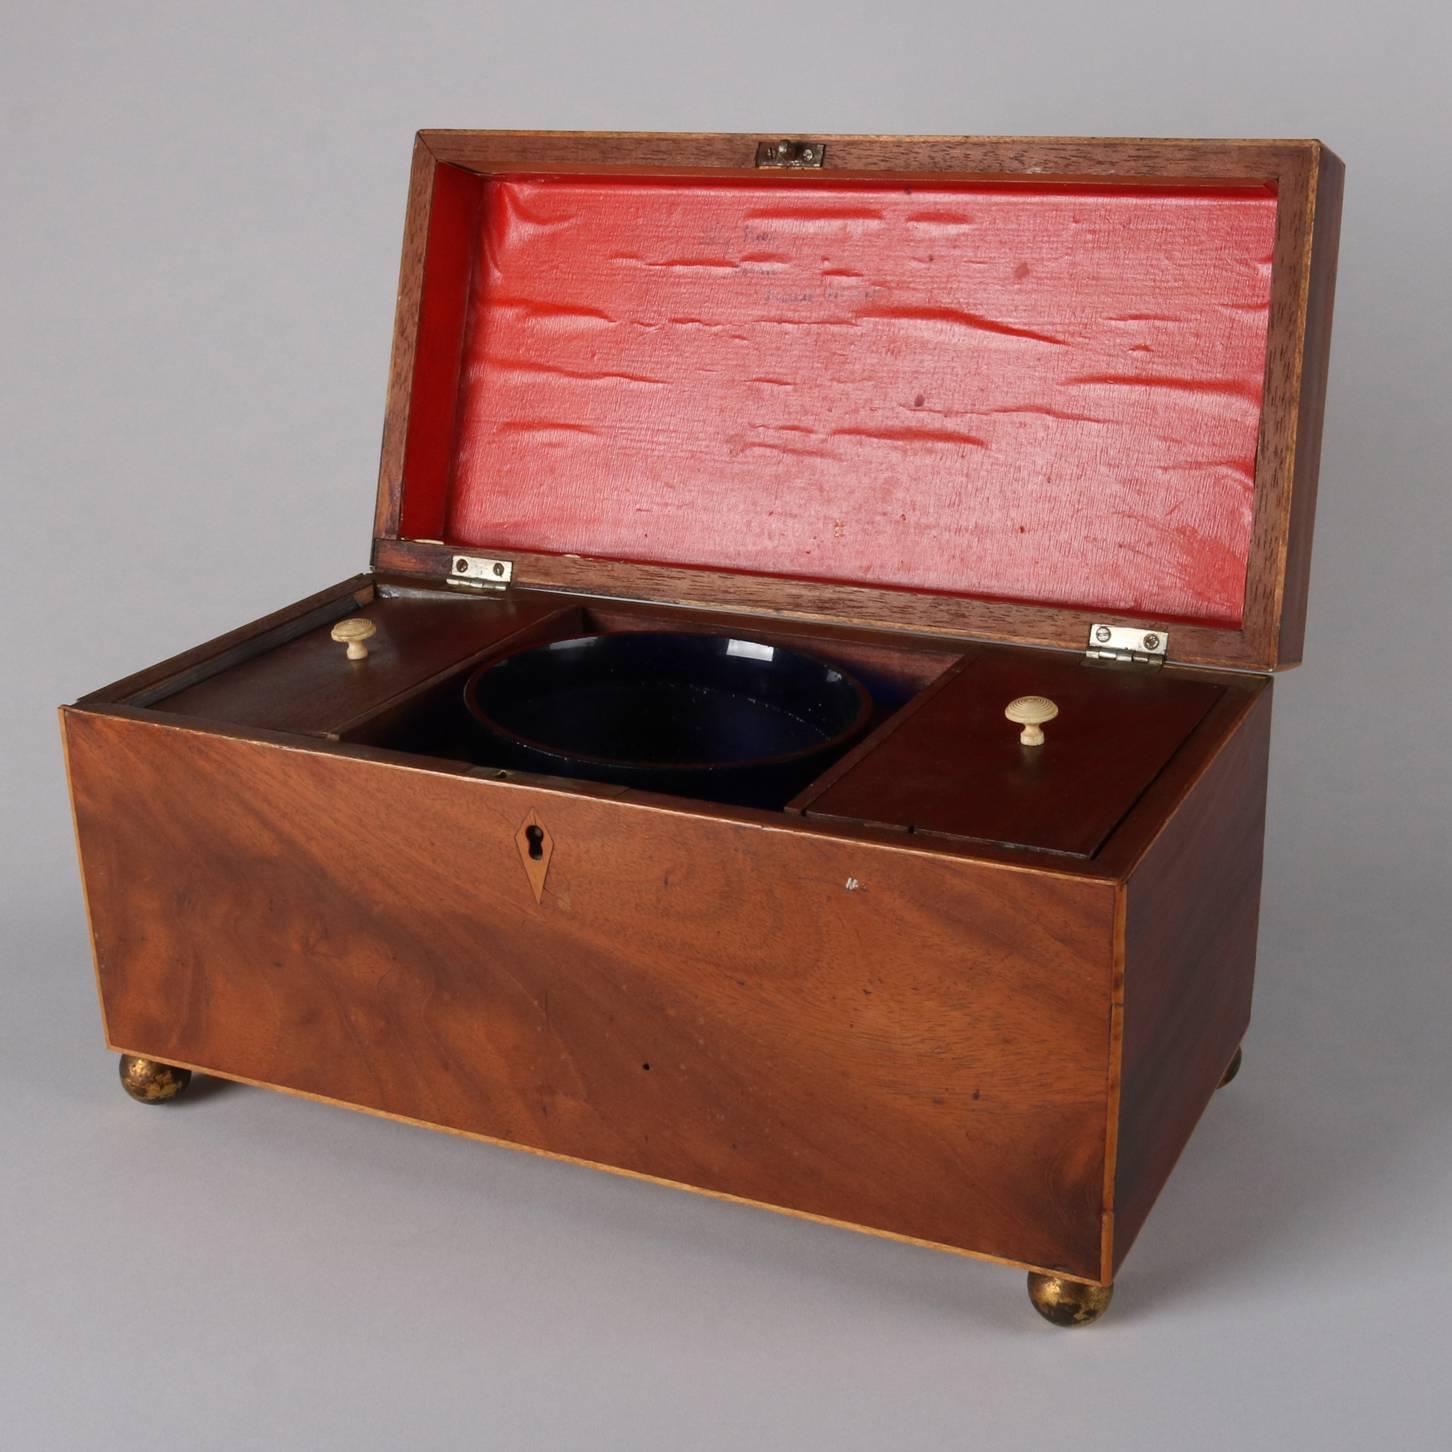 Antique English Edwardian tea caddy features satinwood banded mahogany case, two lidded tea compartments with central cobalt blue glass mixing bowl, seated on gilt bronze ball feet, 19th century (inscribed 